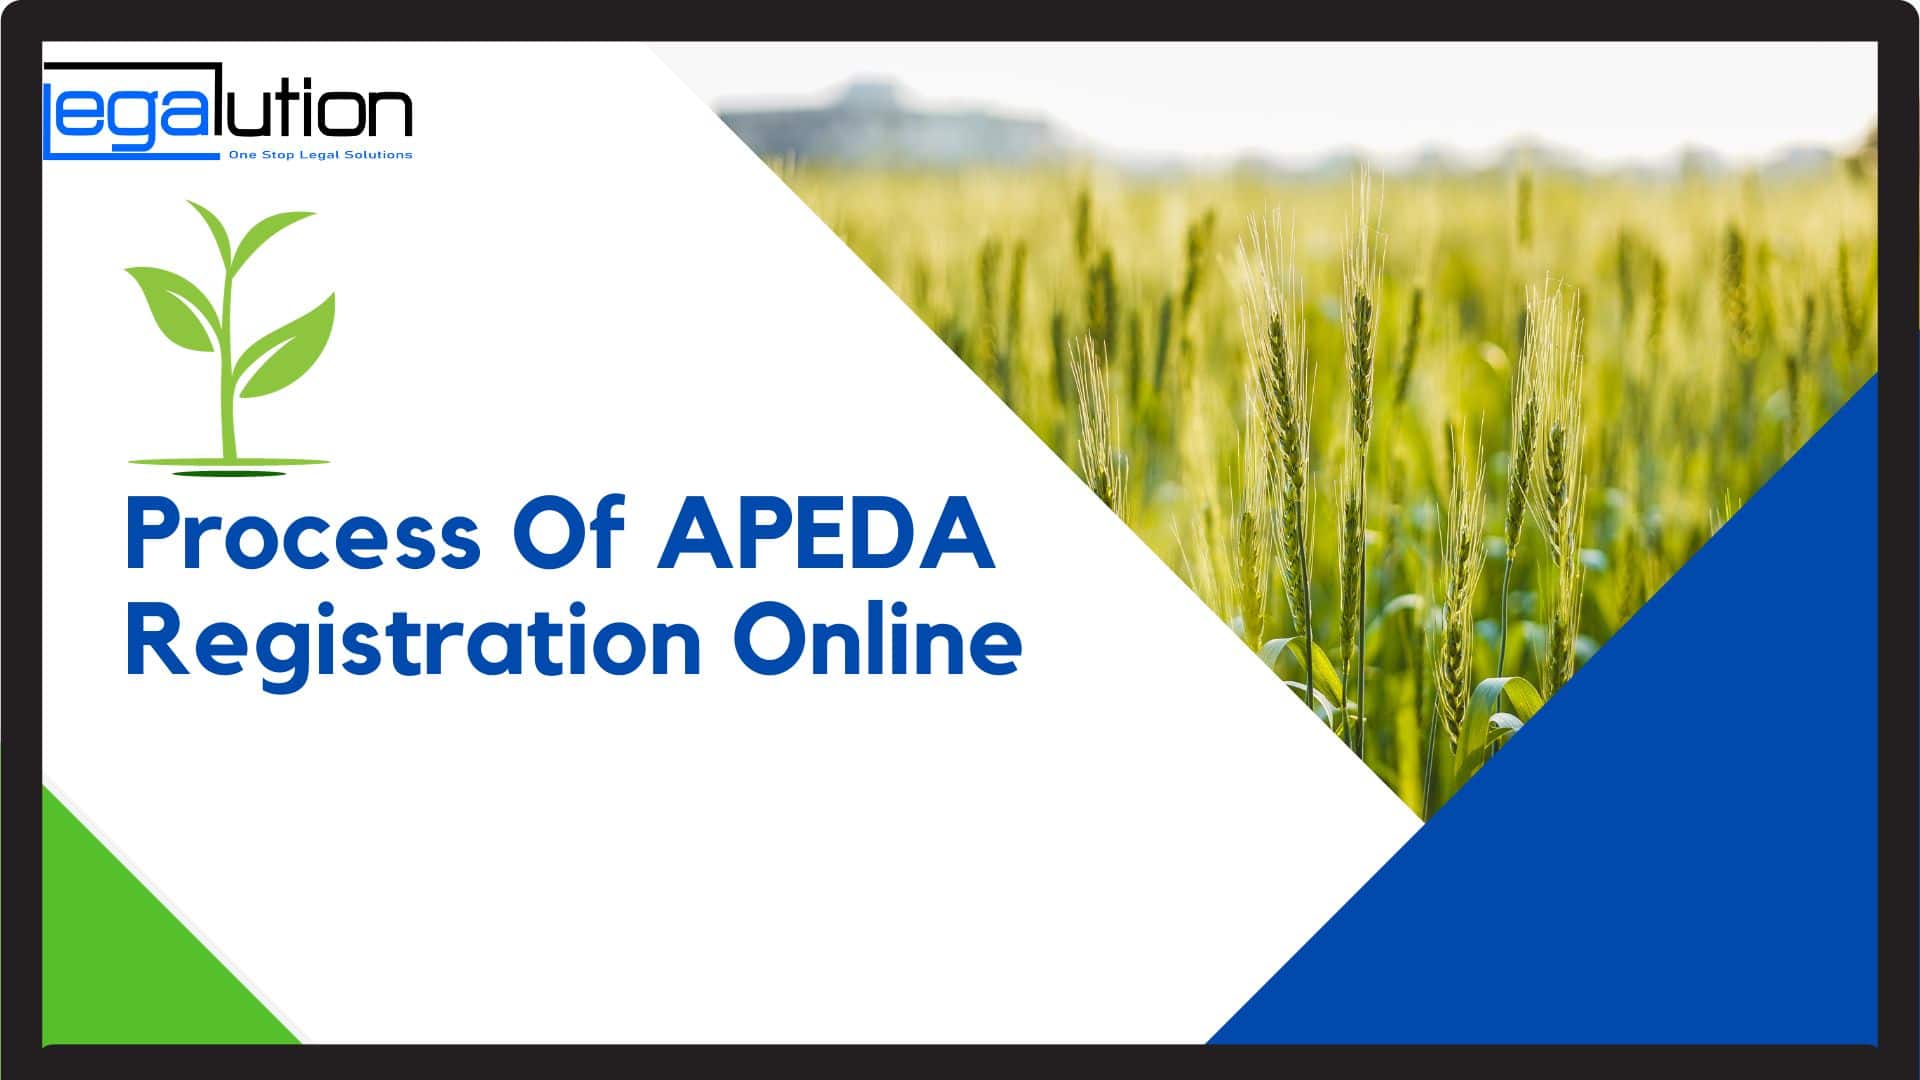 Easy Process of APEDA Registration Online: Explained